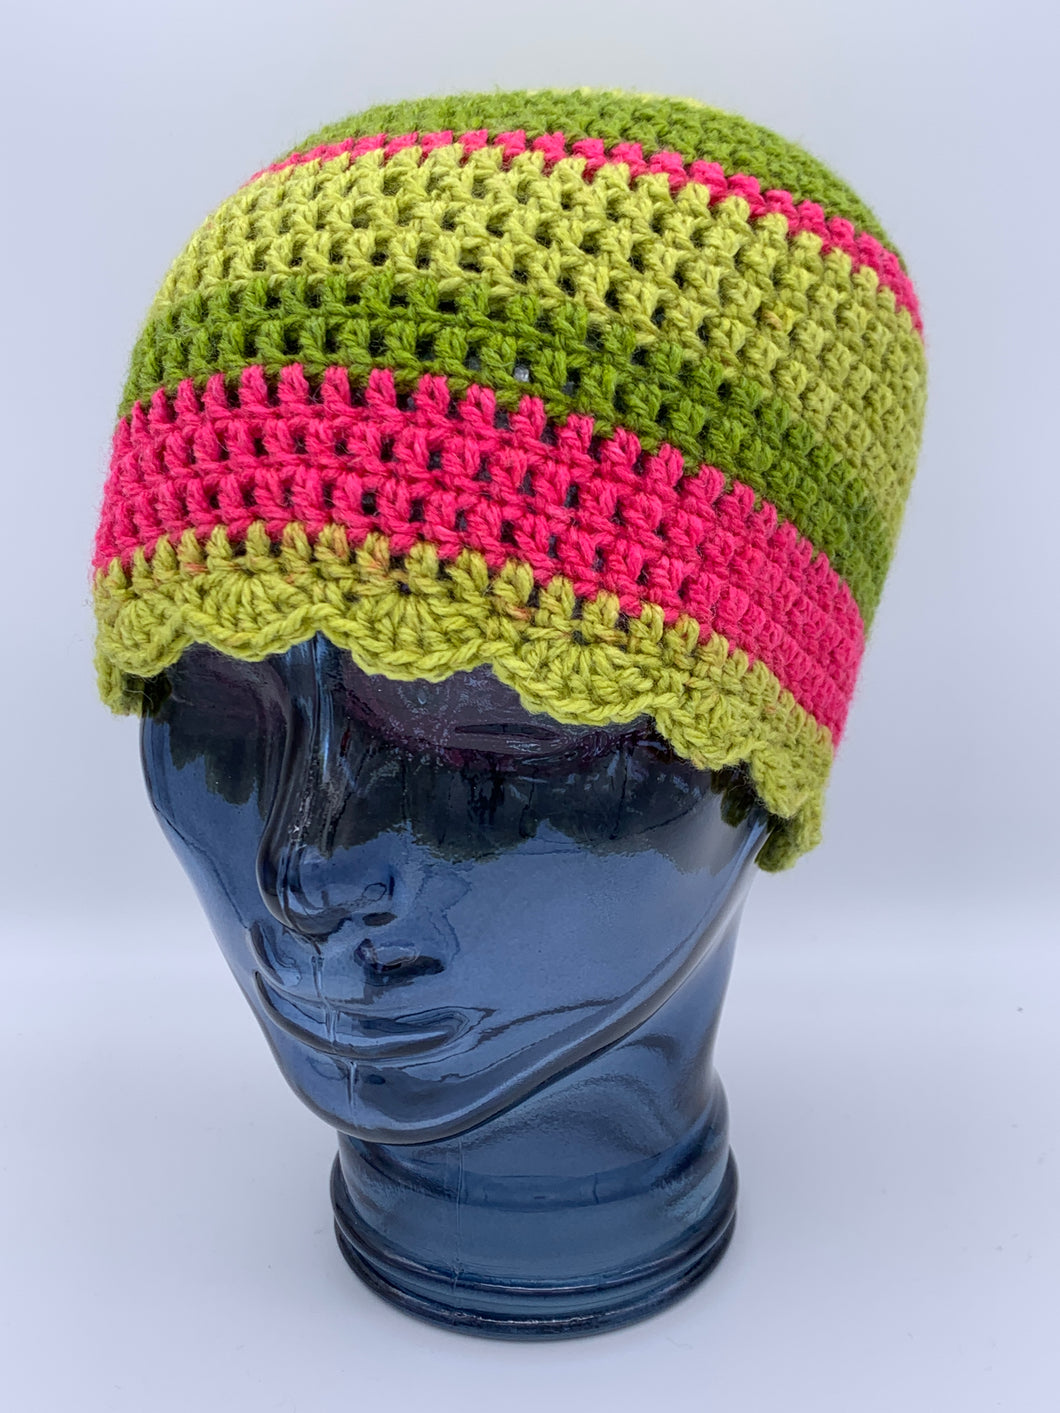 Crochet striped green and pink beanie hat with scalloped edge- Size medium adult